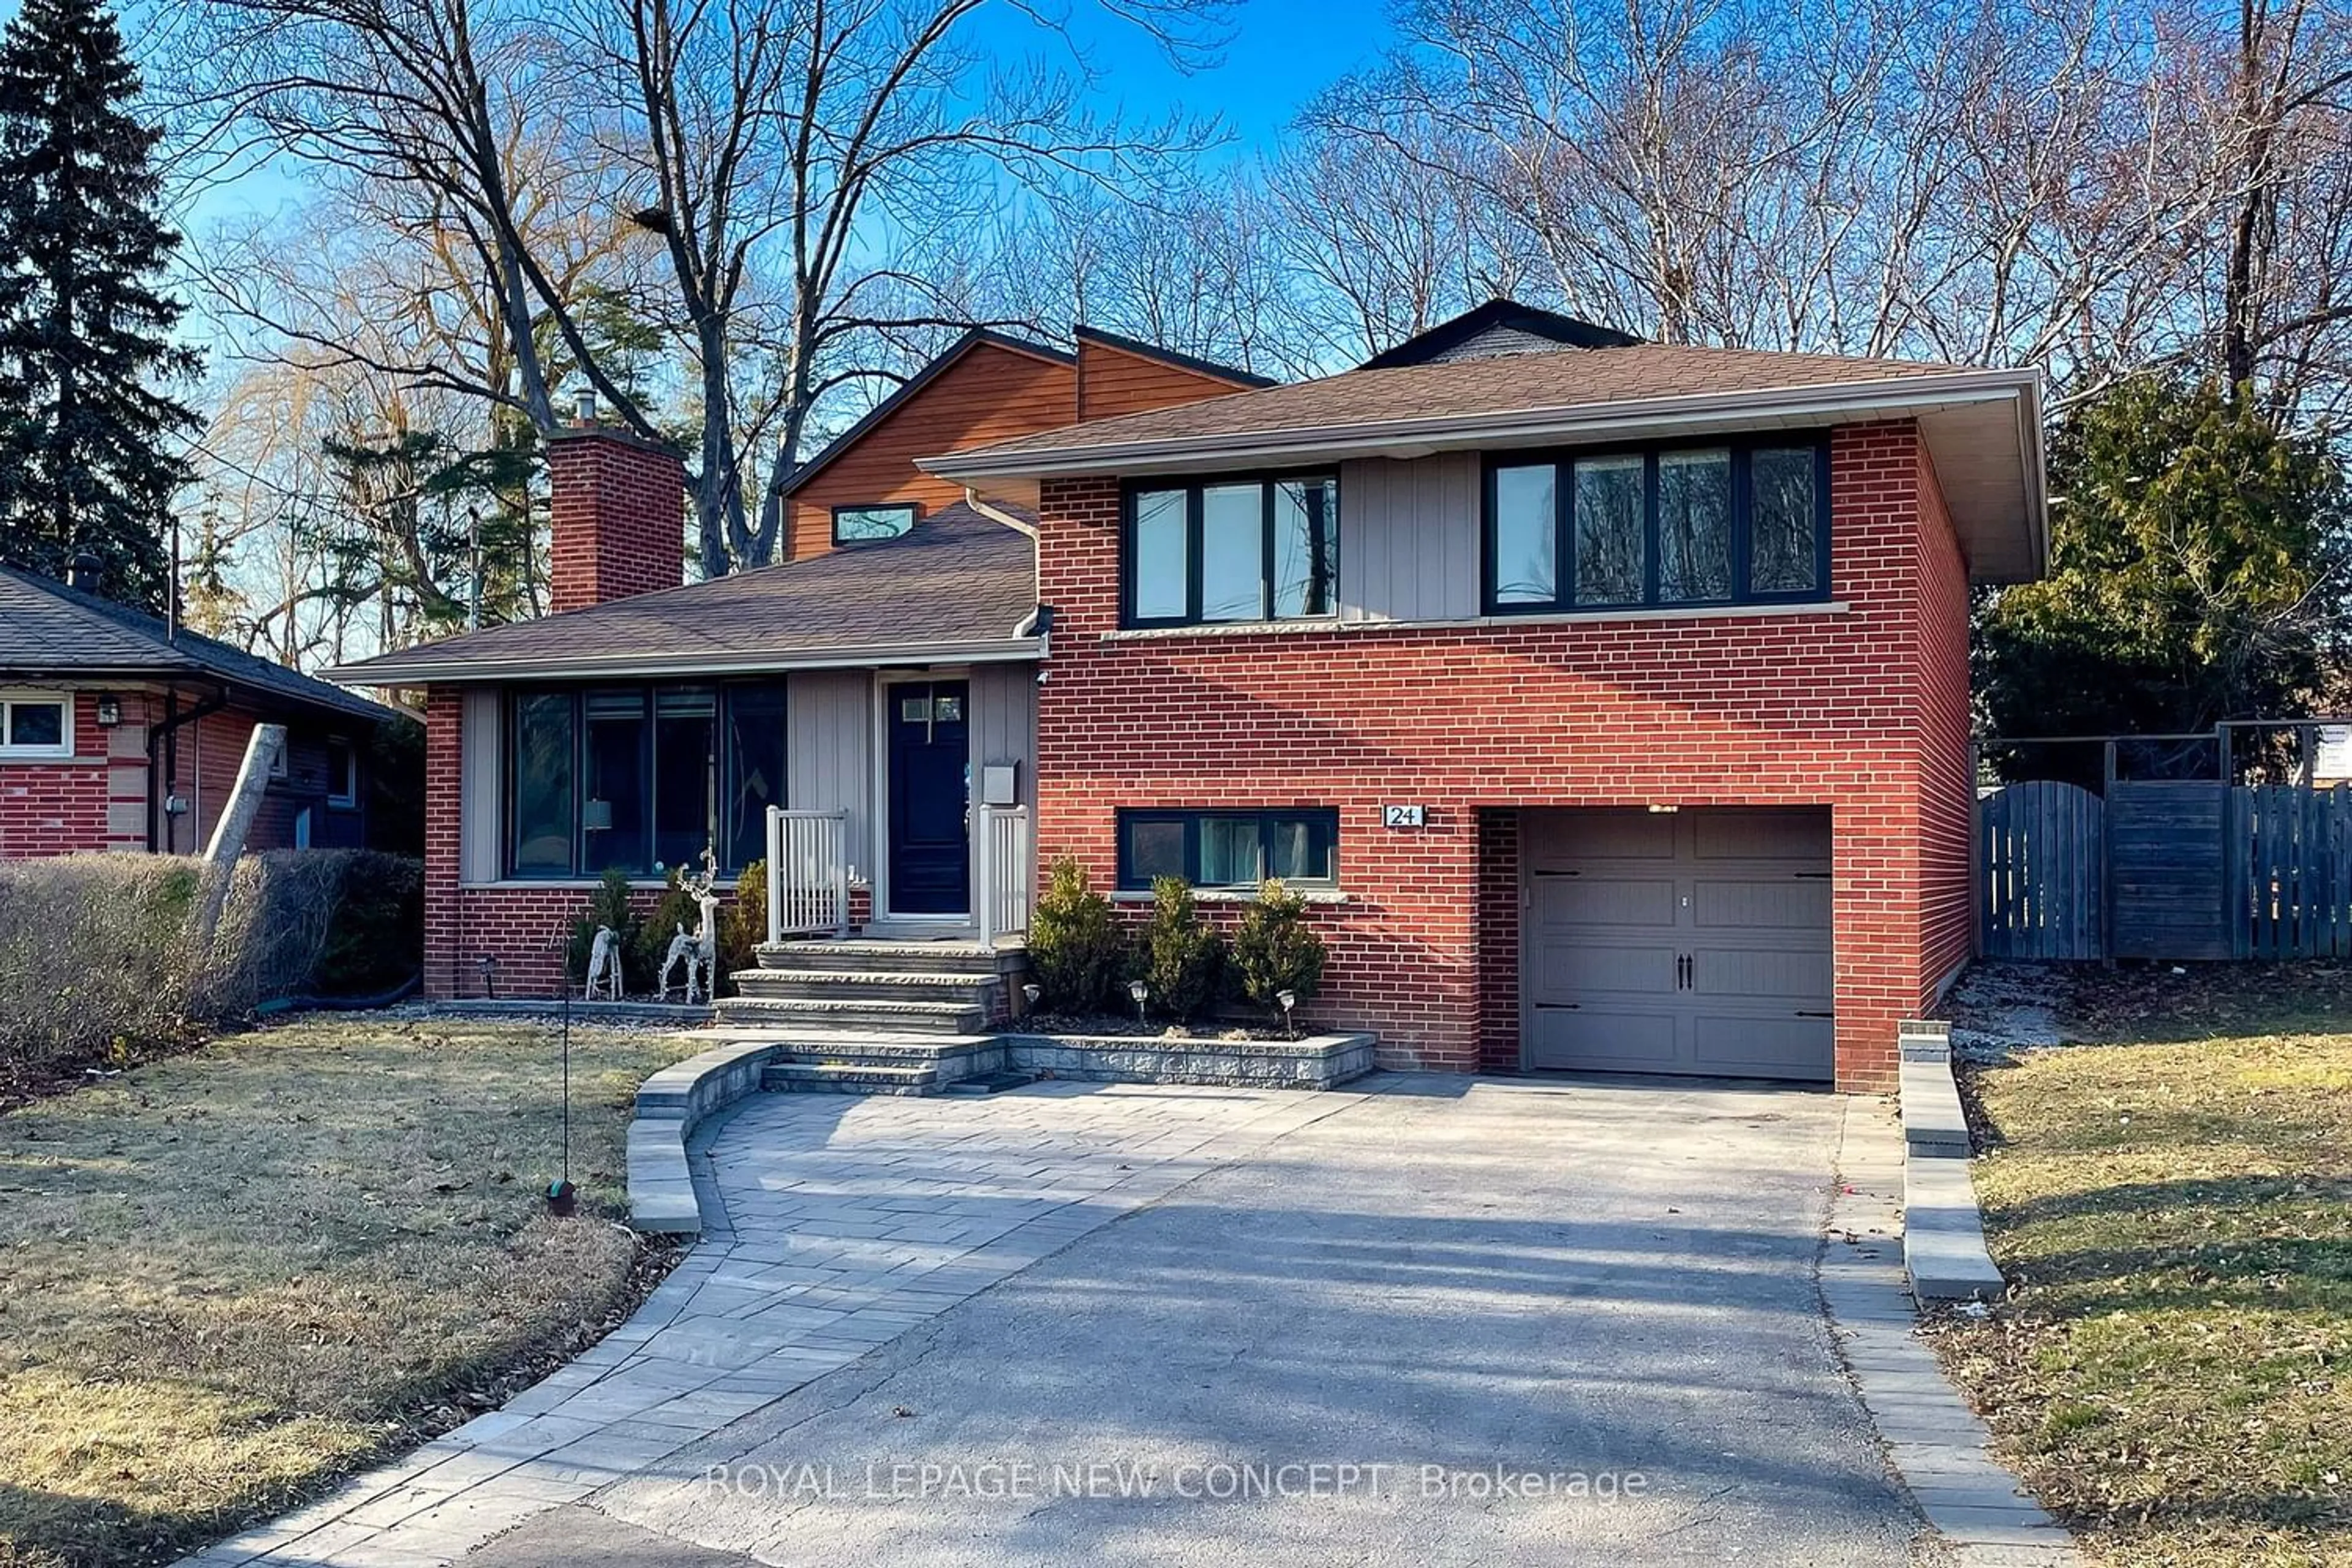 Home with brick exterior material for 24 Fleetwell Crt, Toronto Ontario M2R 1L3